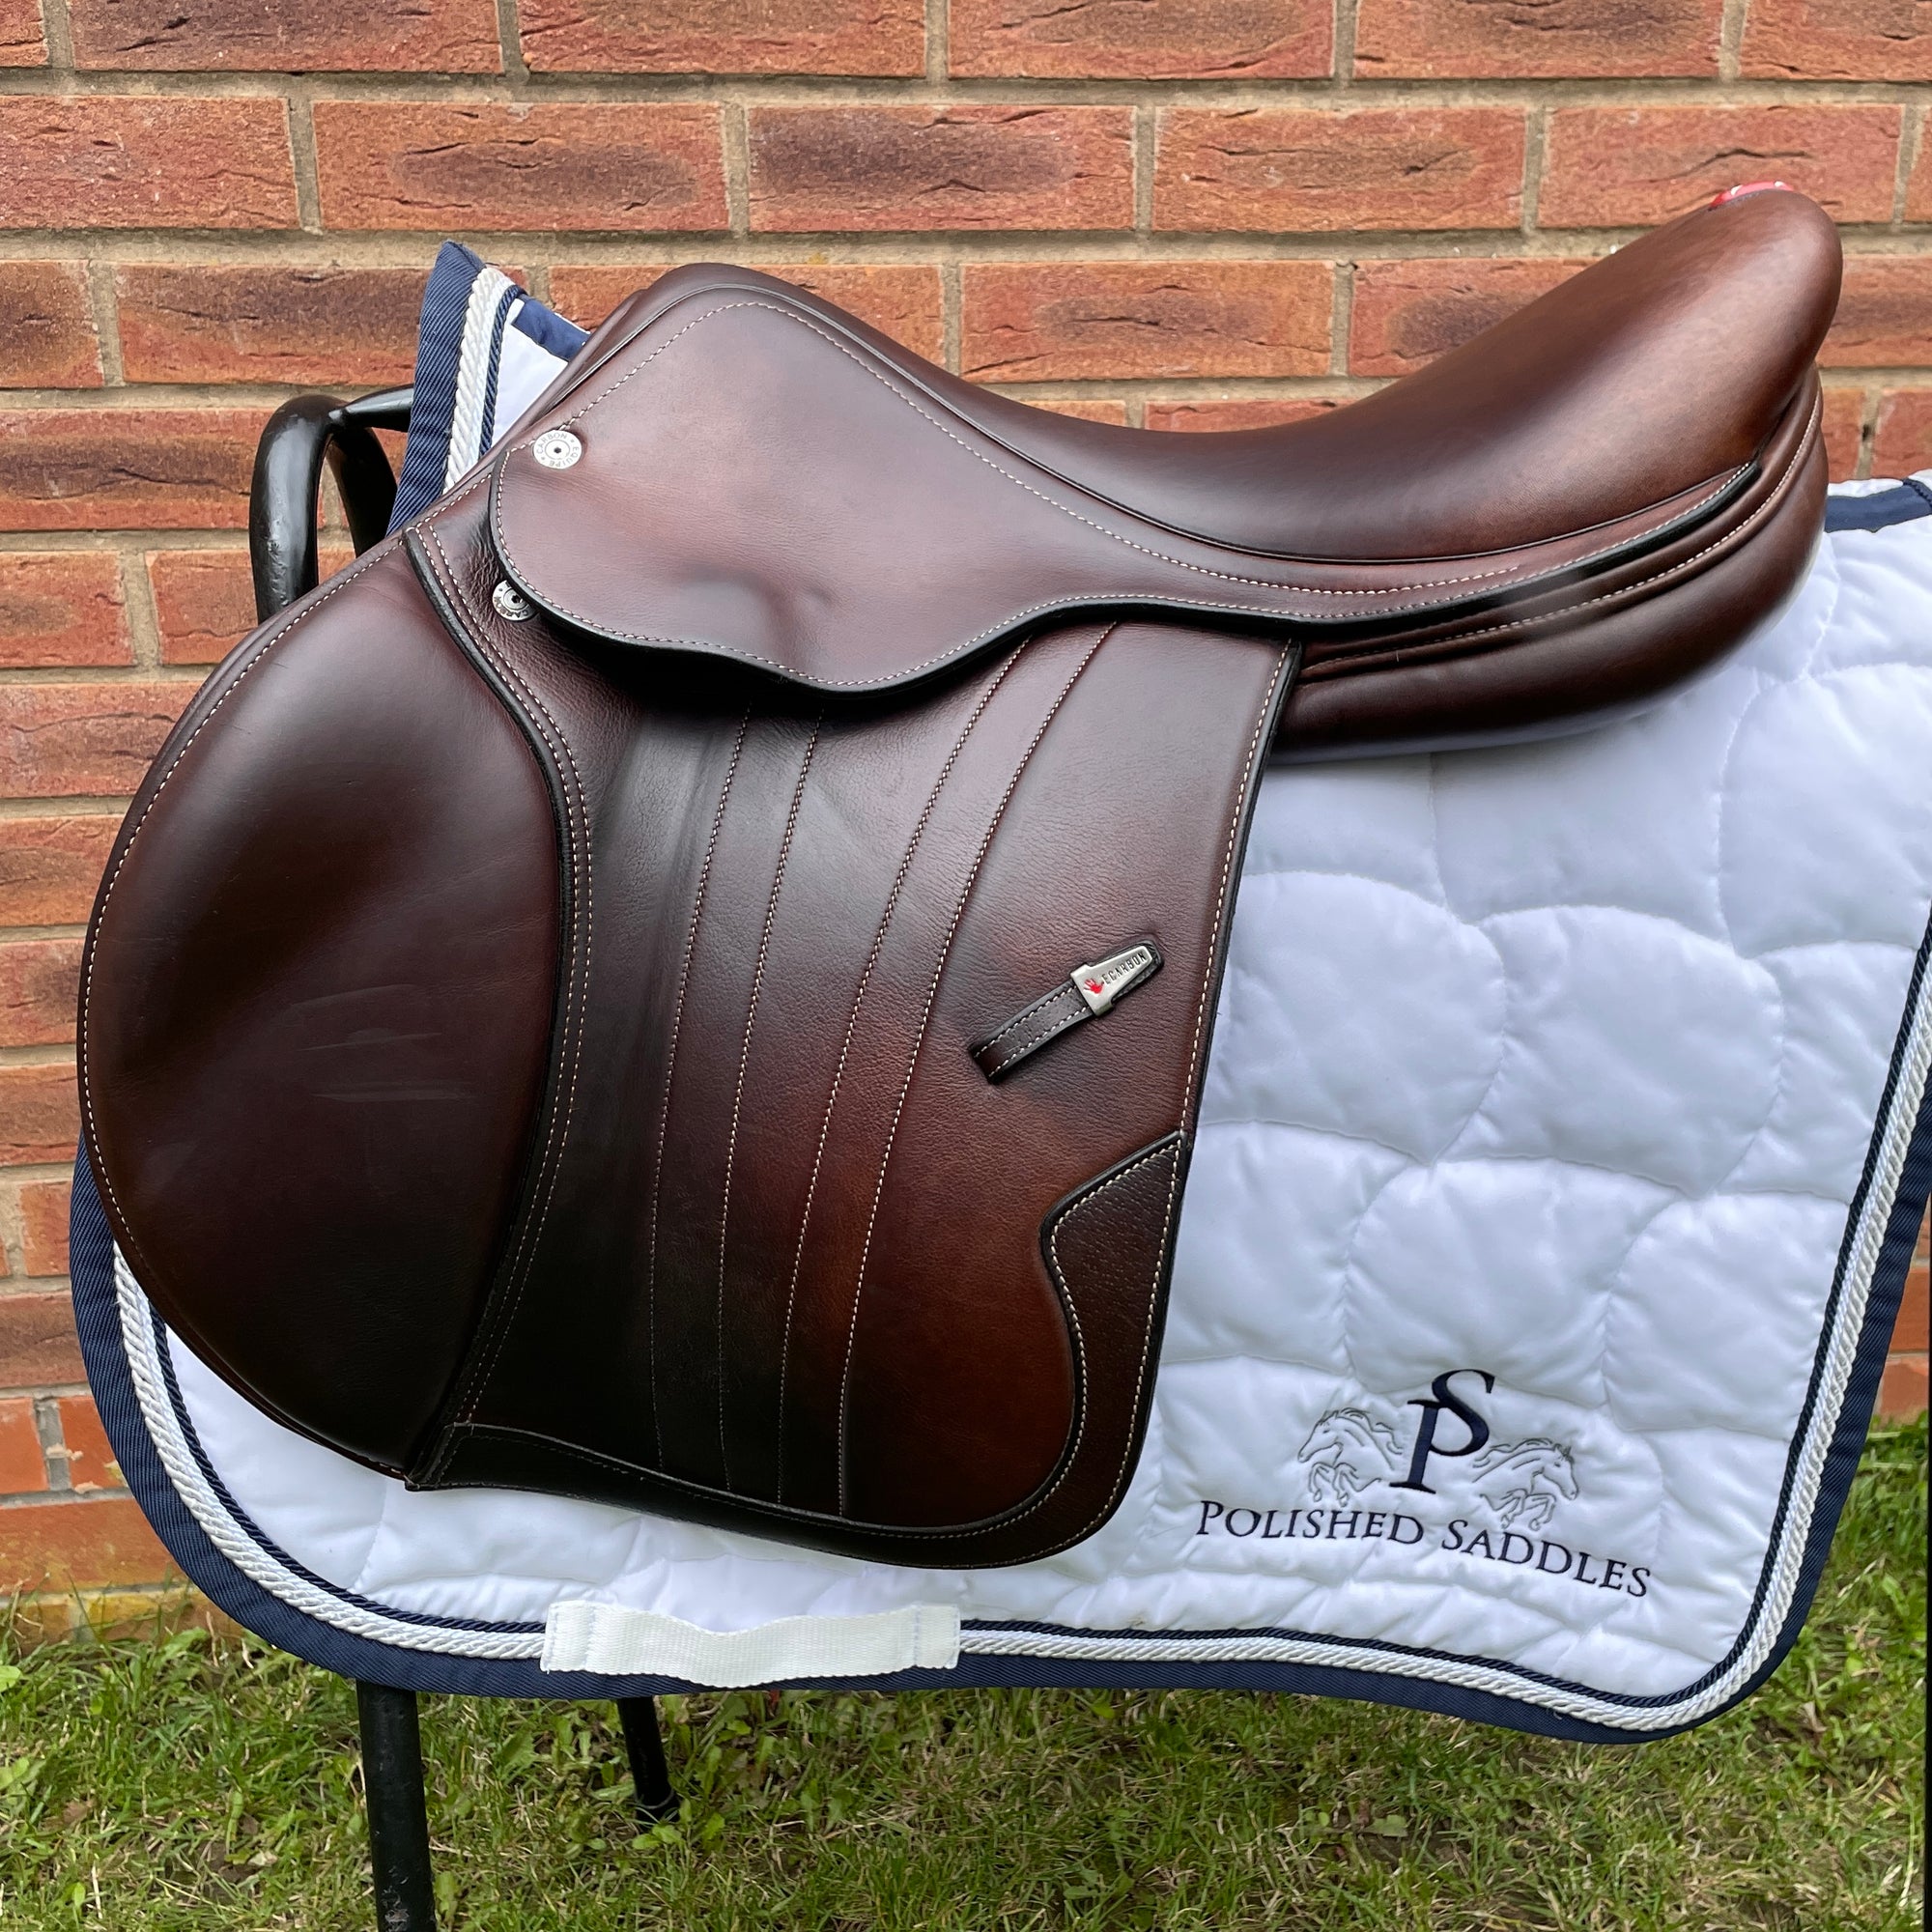 link to sell your saddle